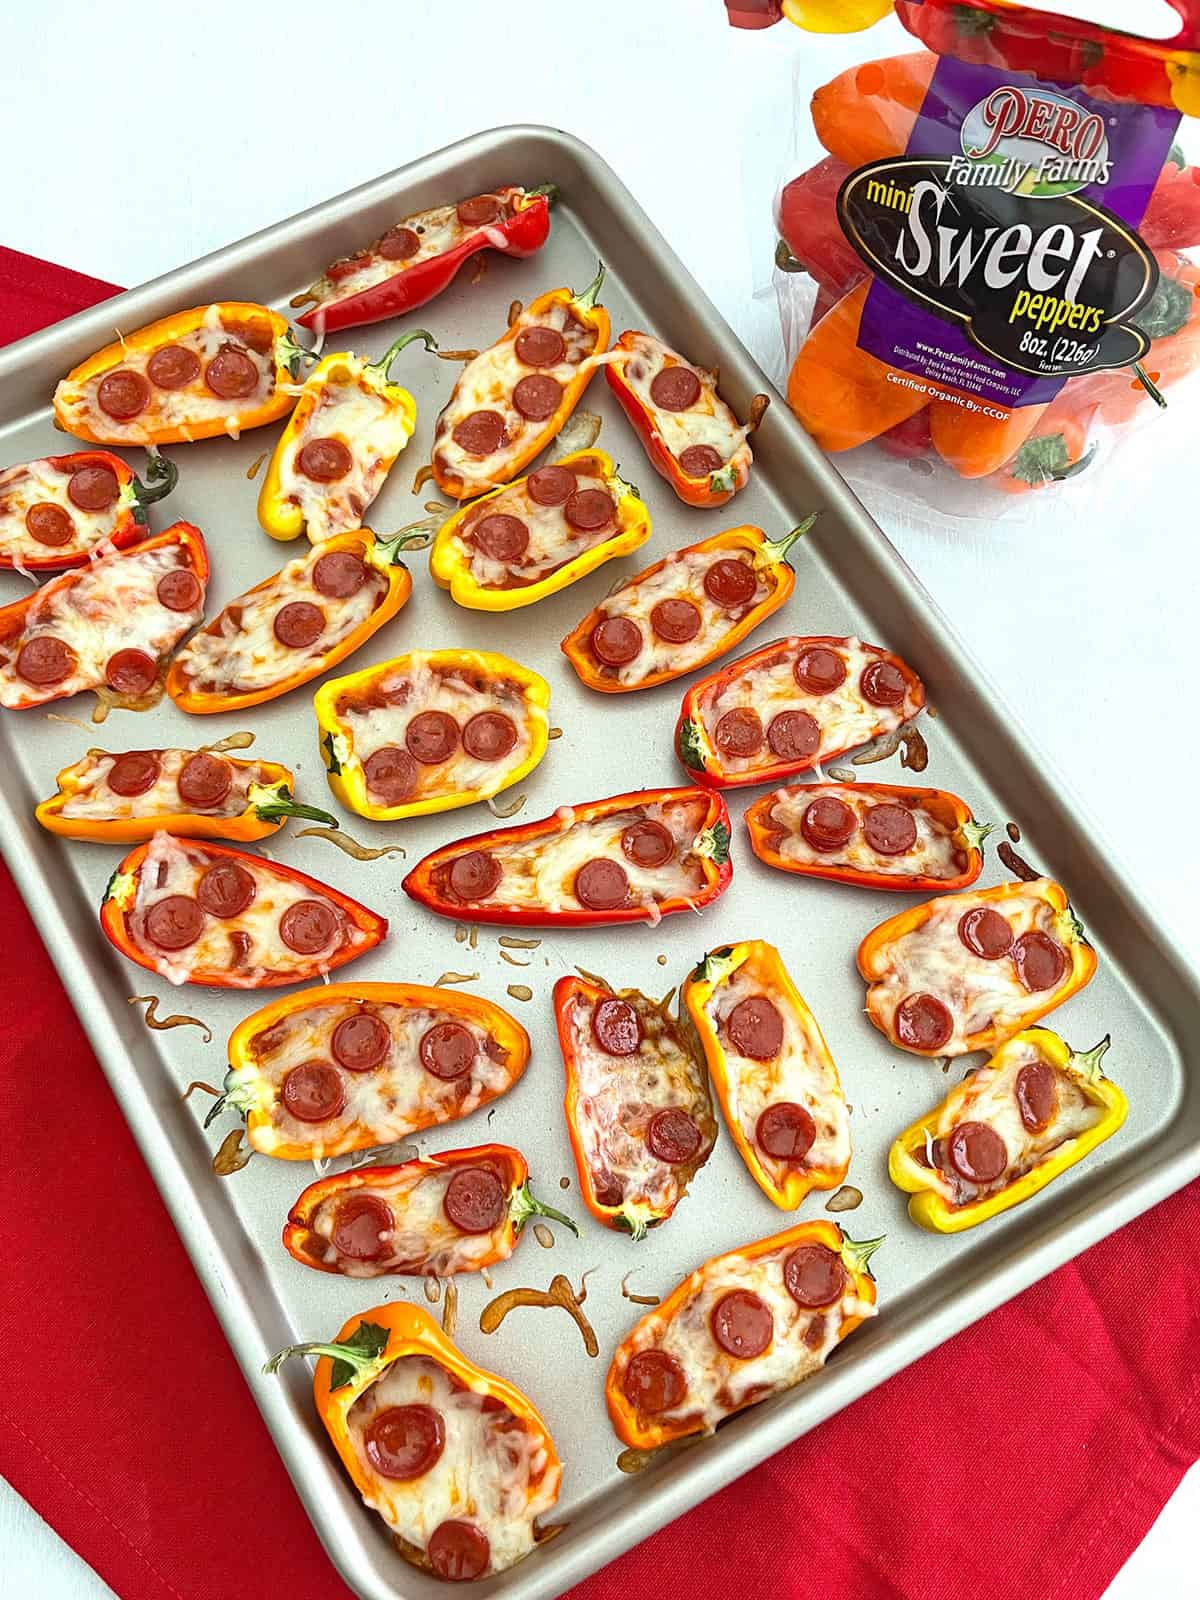 Cooked mini pepper pizzas on baking sheet on top of red towel with package of mini sweet peppers in background.